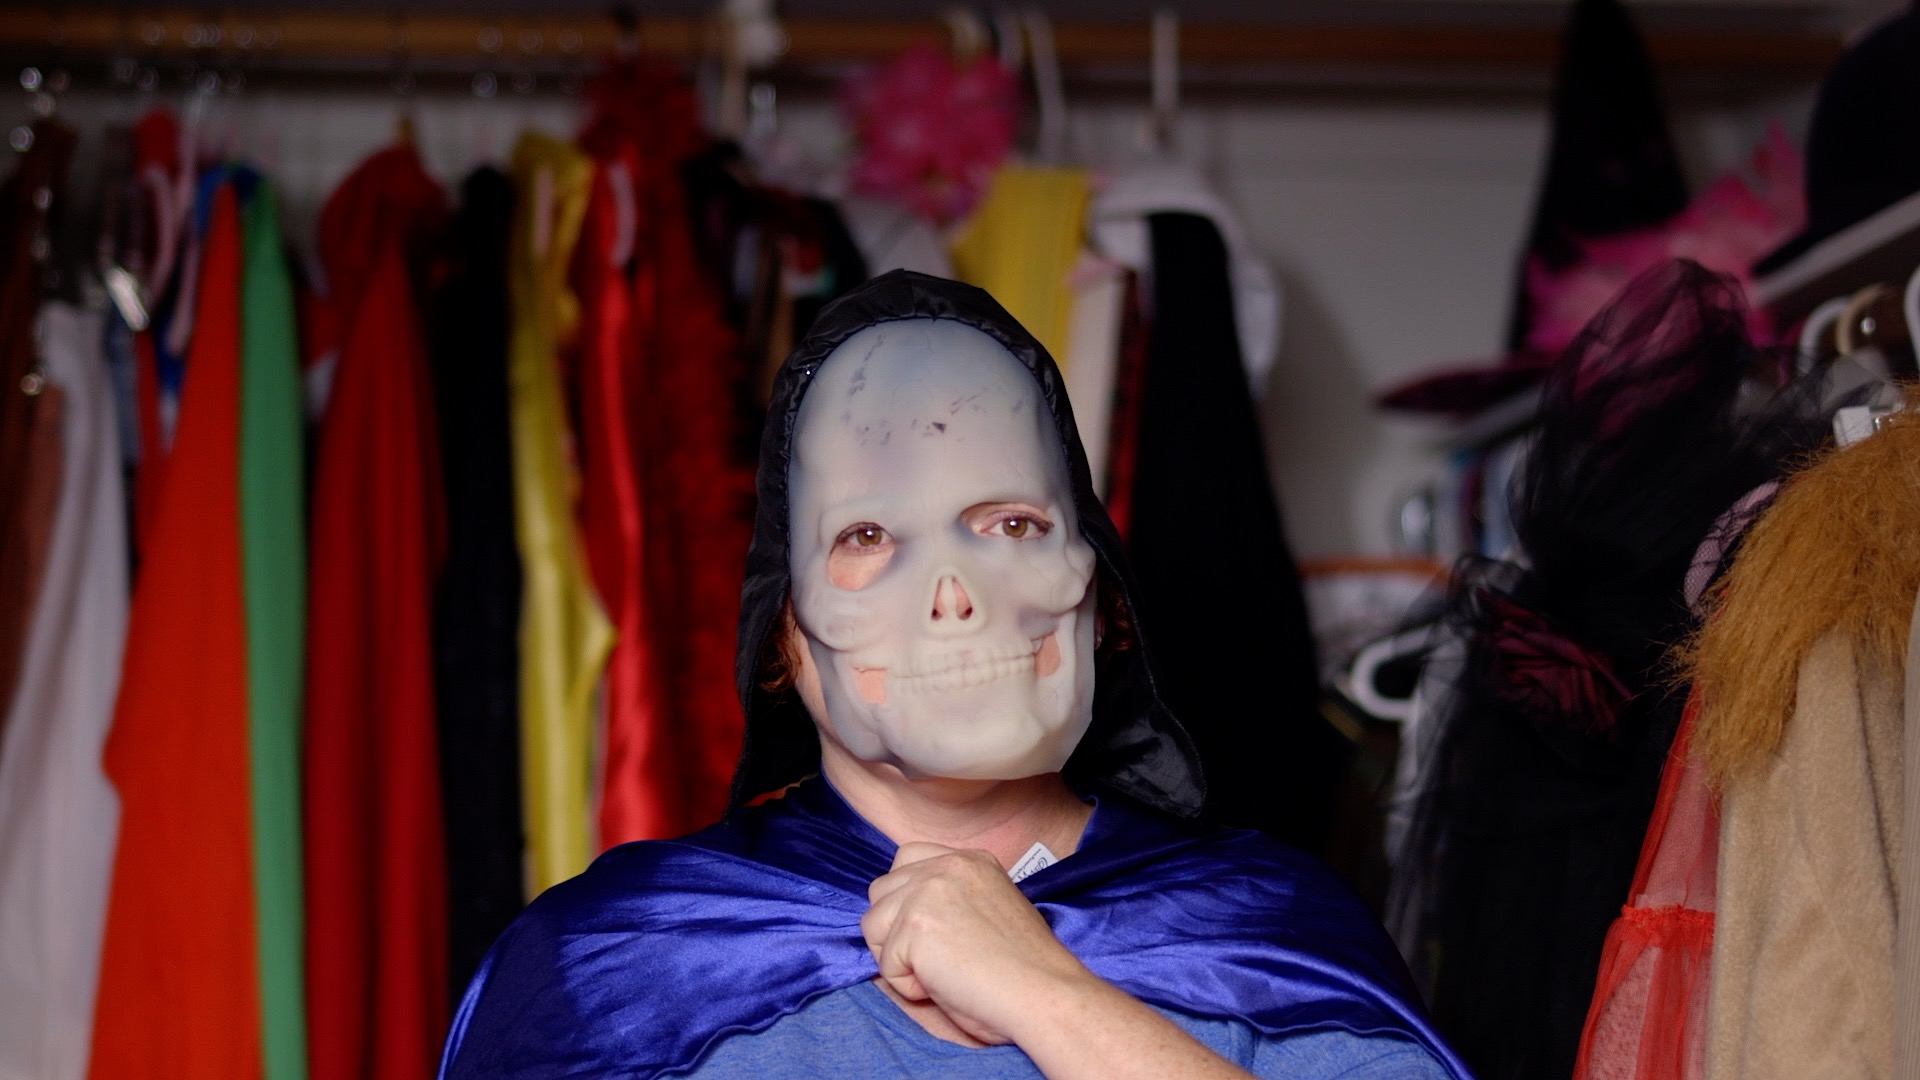 A woman wearing a skull mask and a bright blue cape stands in a closet full of costumes.